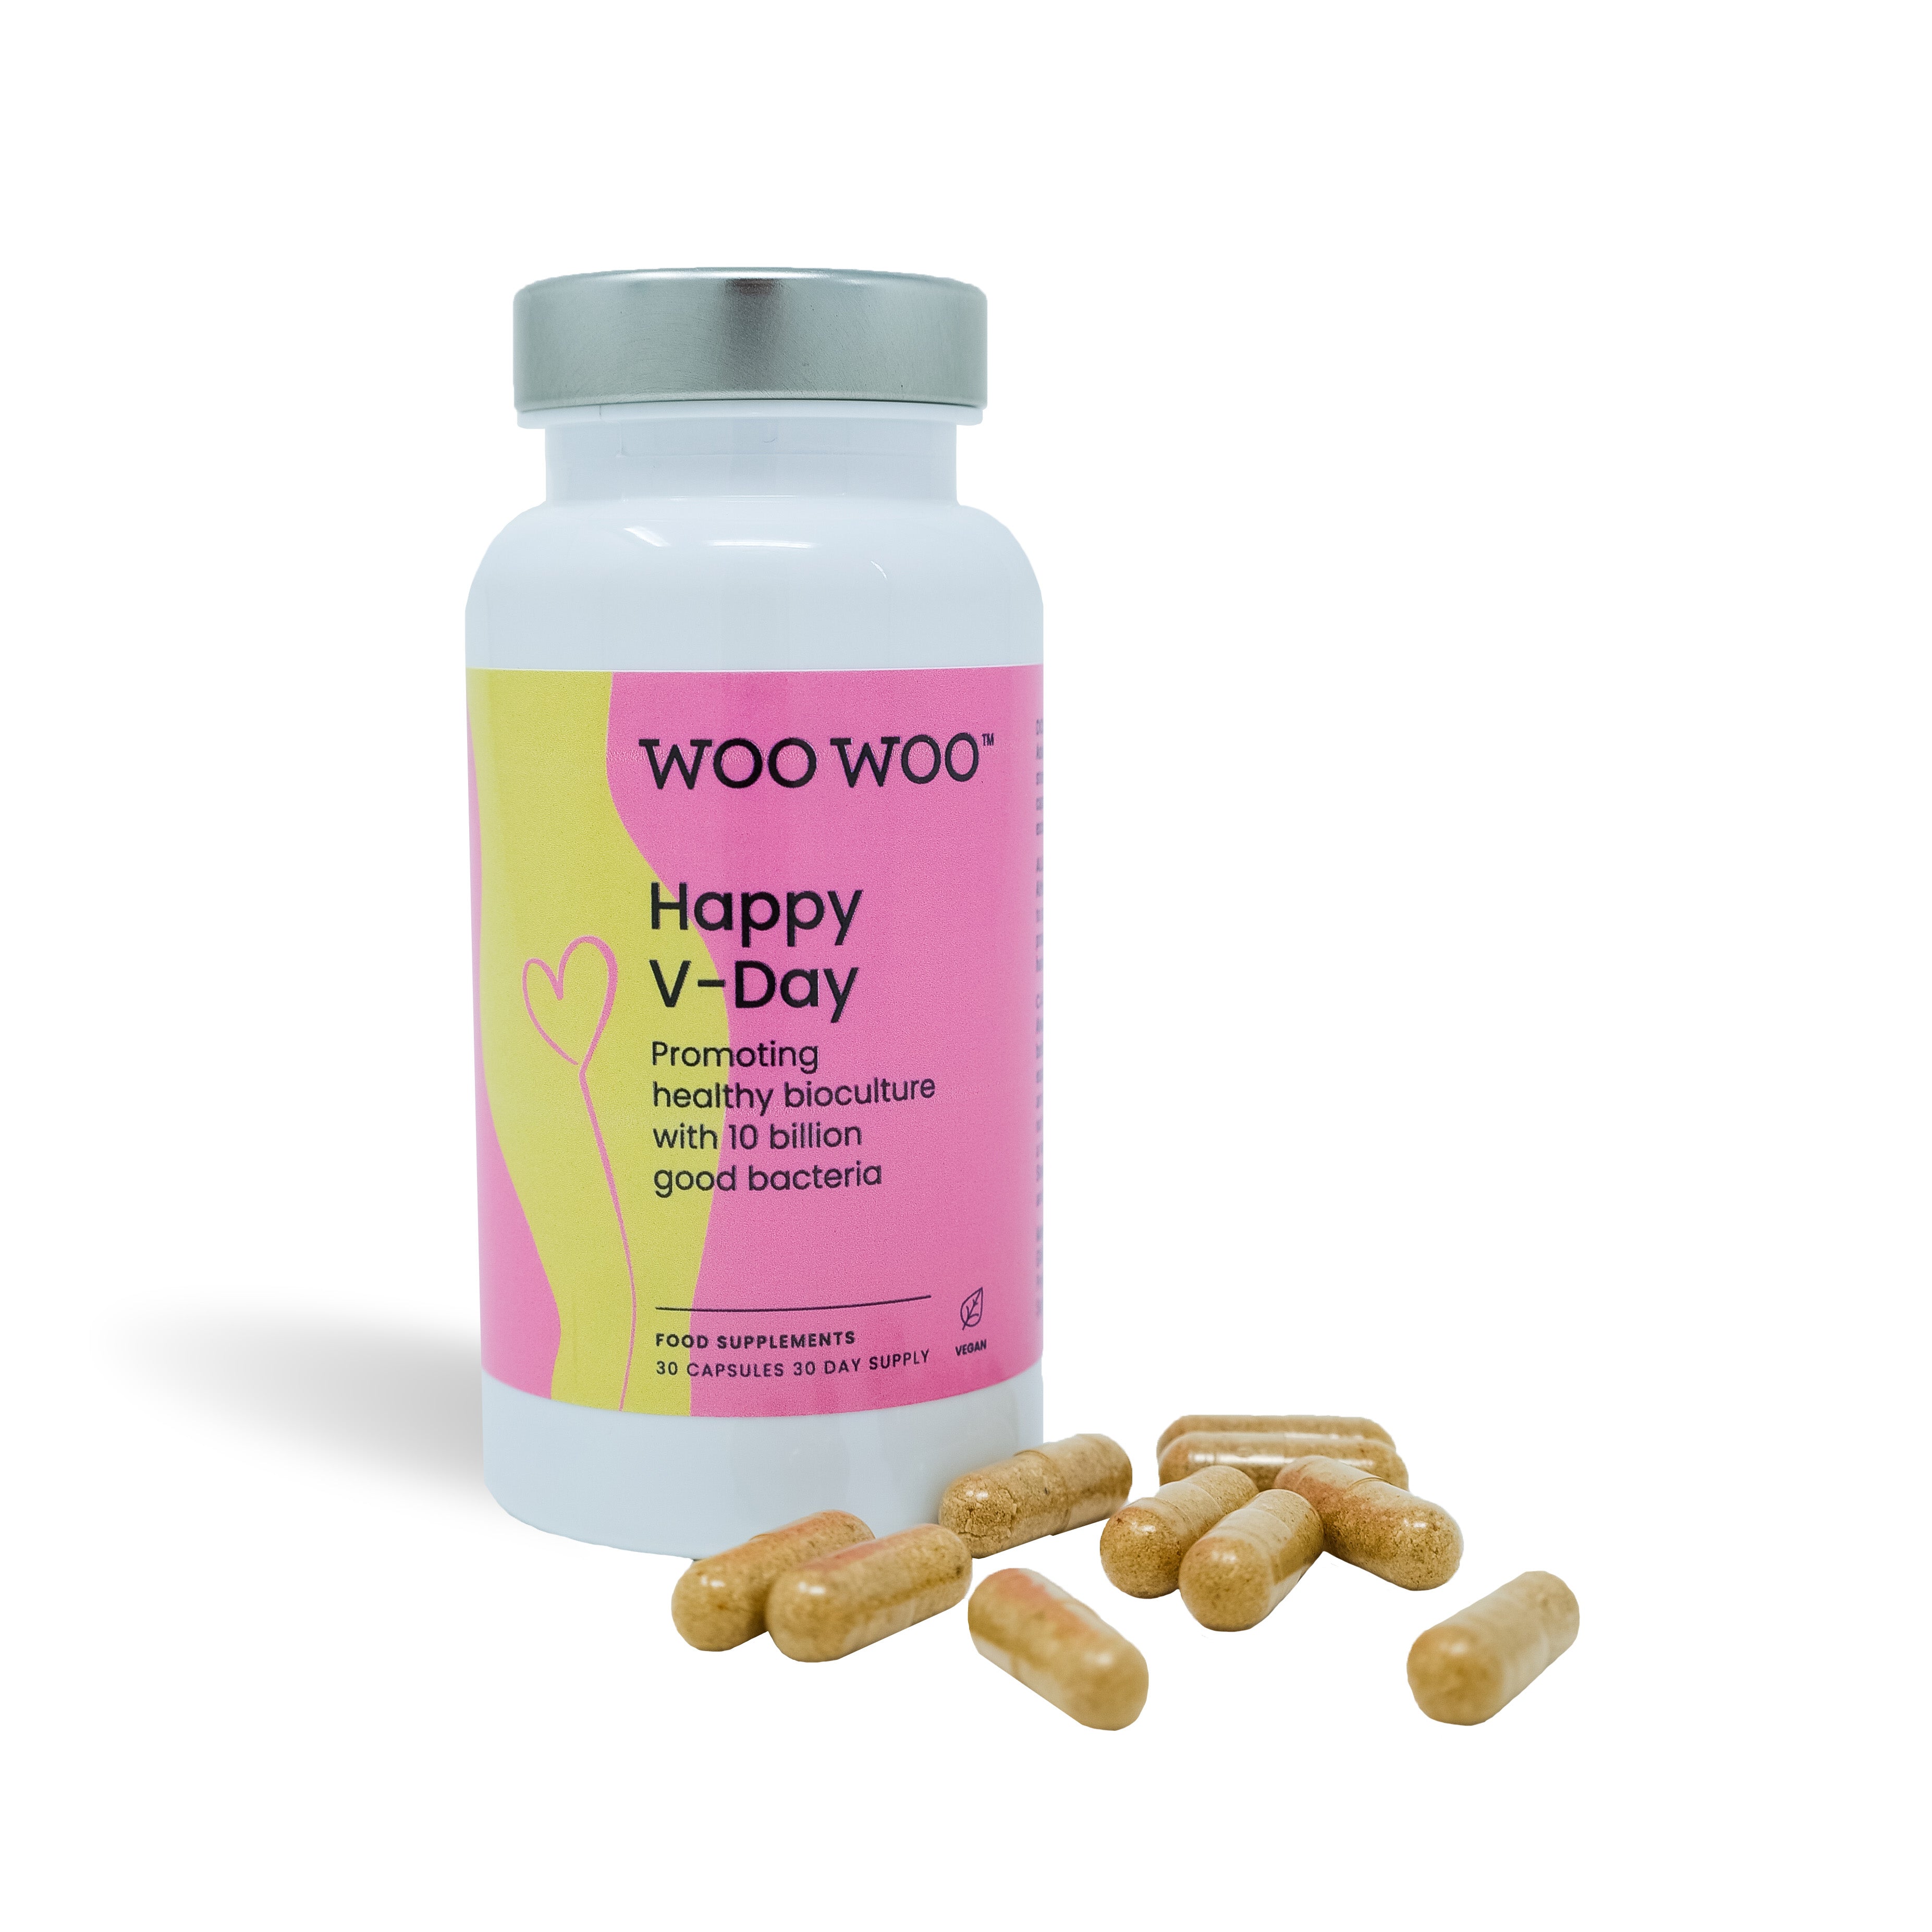 Happy V-Day - daily supplement to keep you V happy!